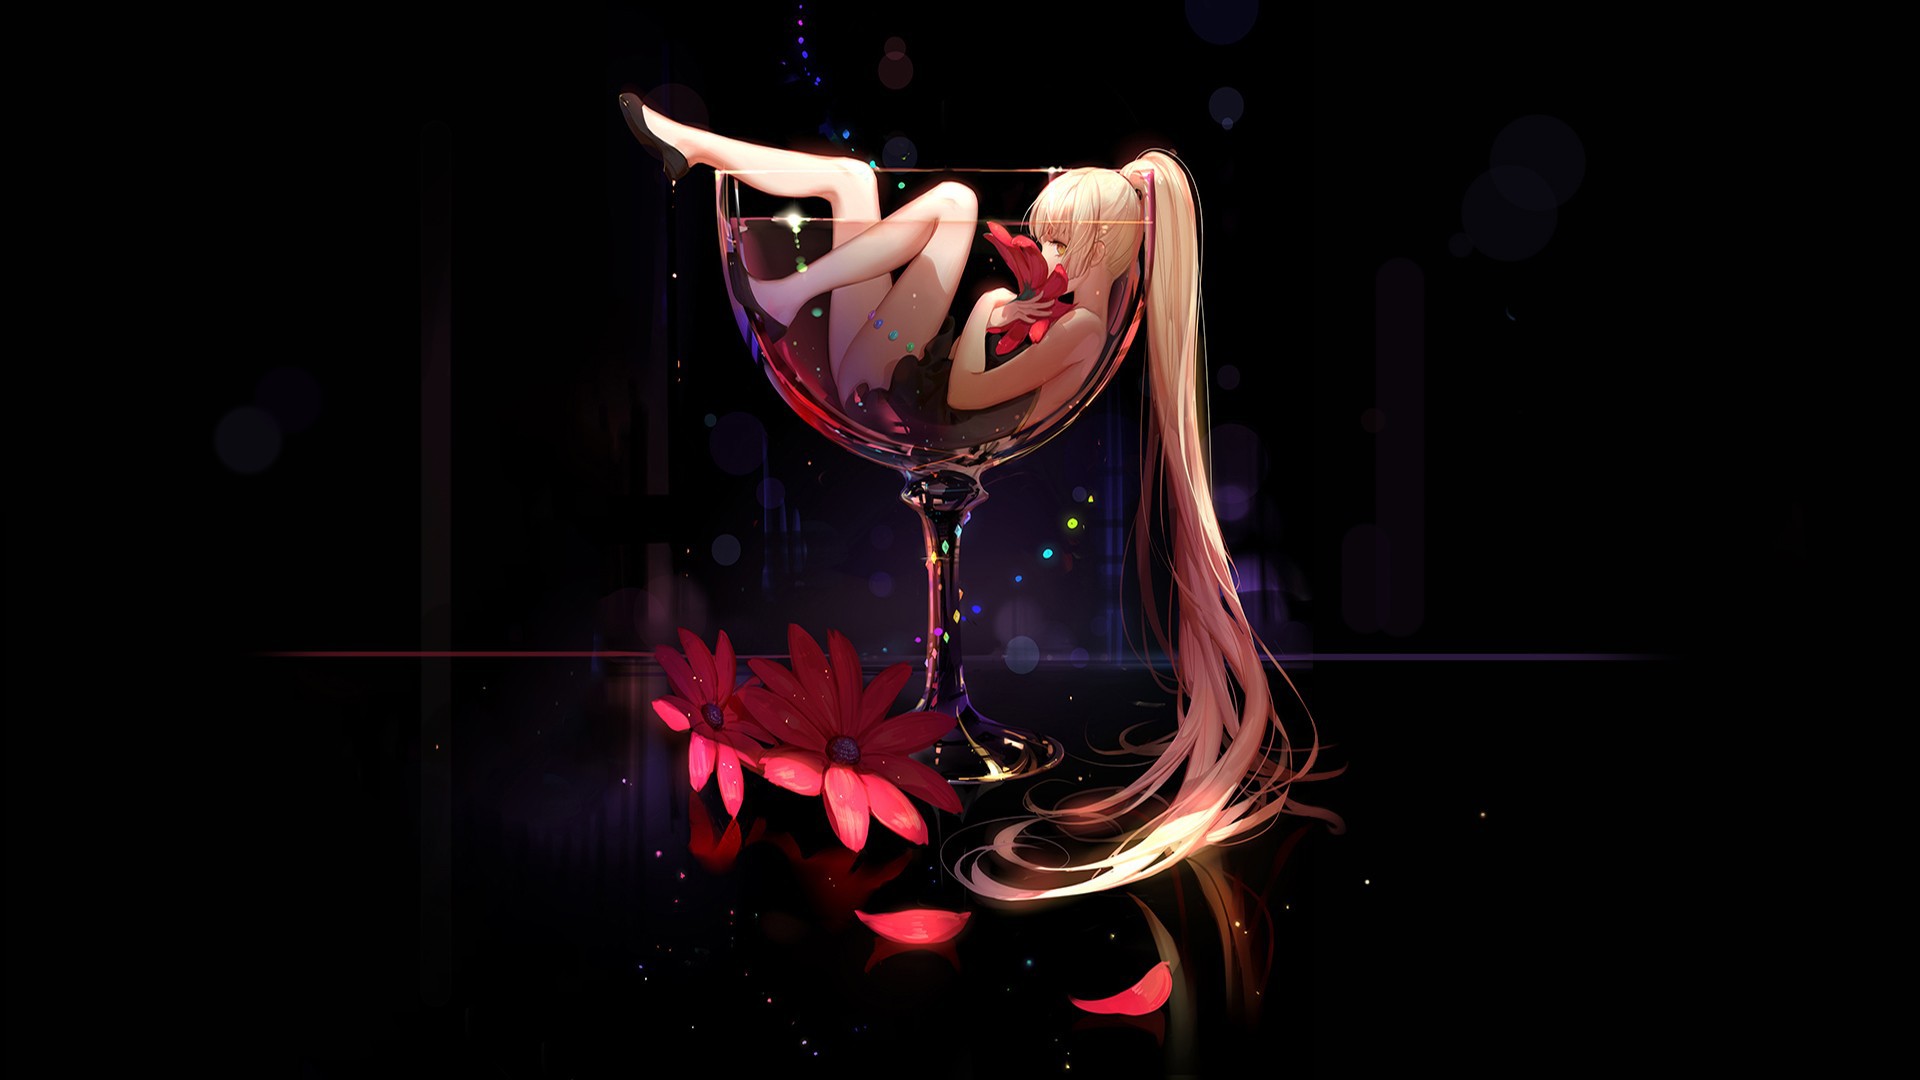 Anime girl lies in a glass wallpapers and images - wallpapers, pictures